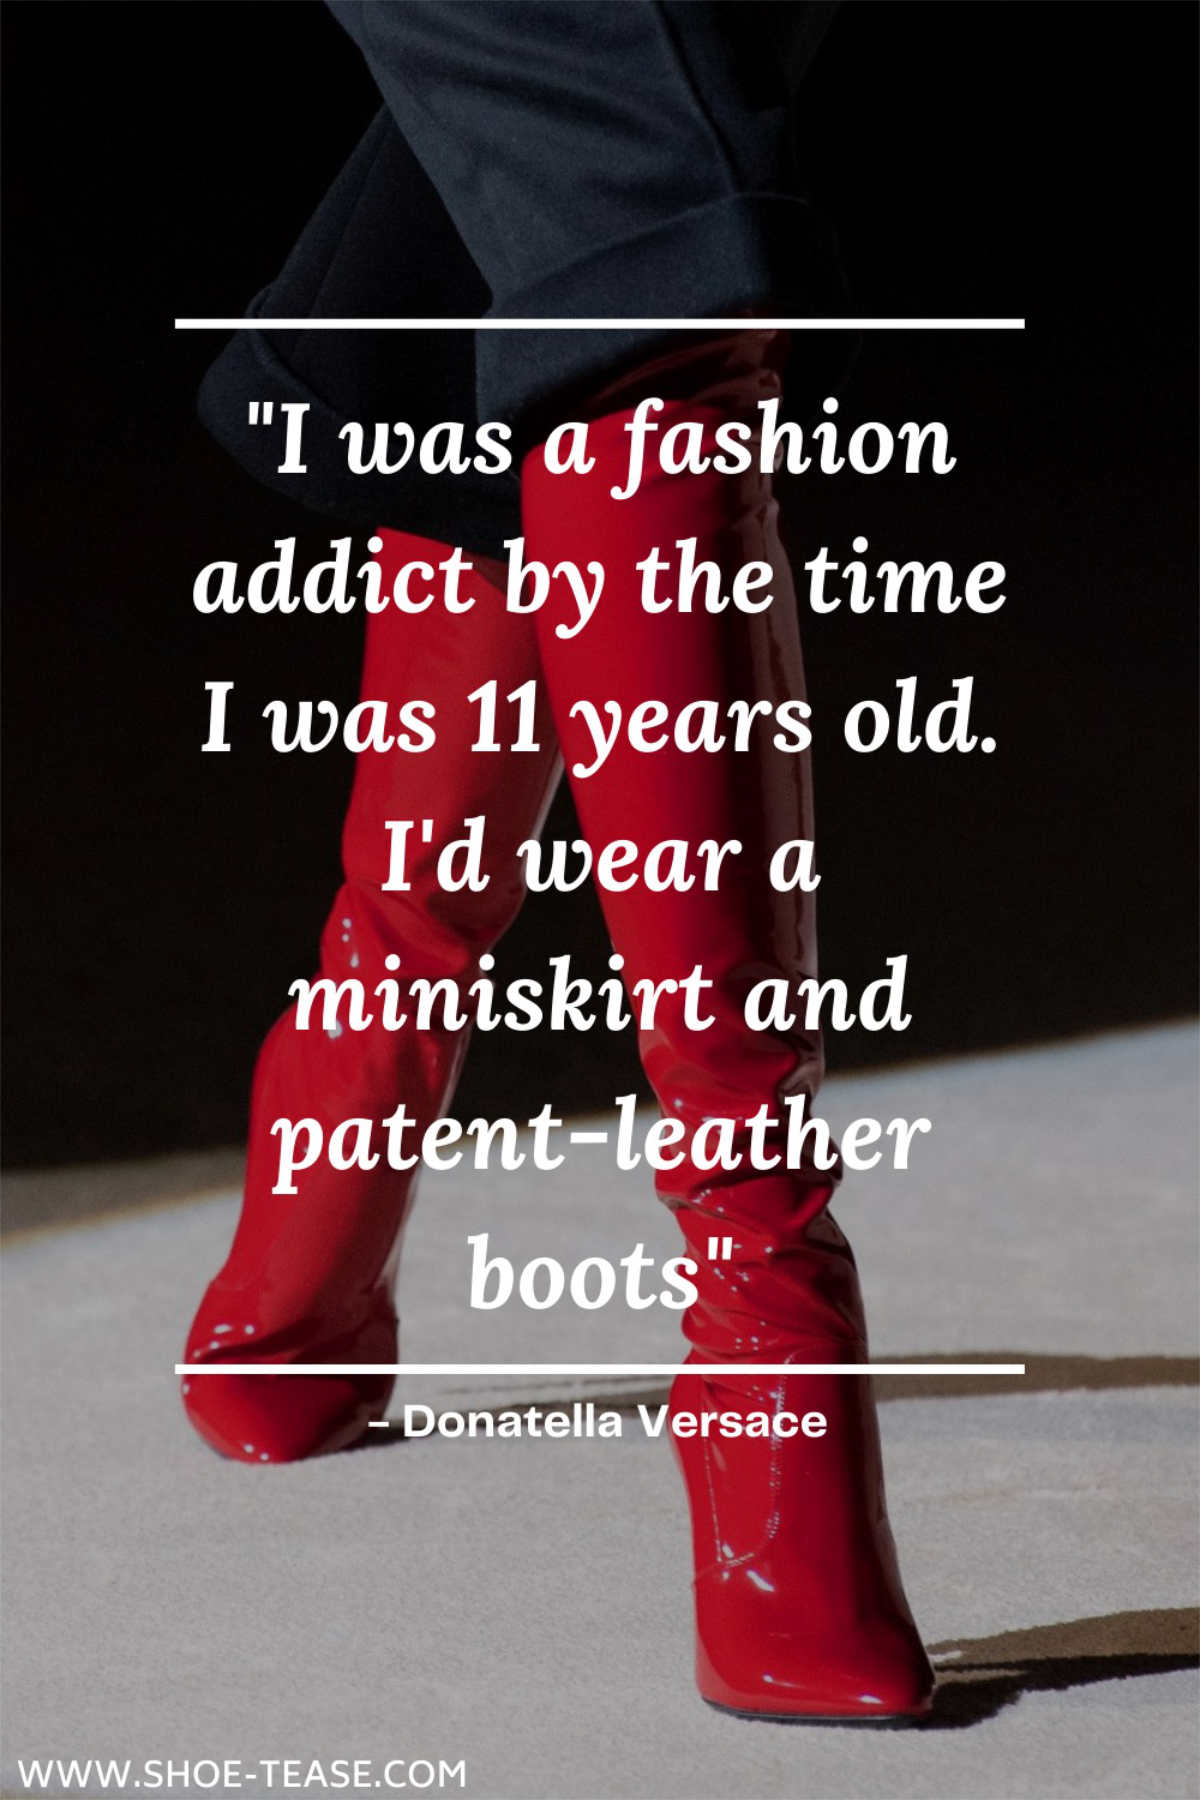 Text reading I was a fashion addict by the time I was 11 years old. I'd wear a miniskirt and patent-leather boots Donatella Versace over close up of woman's legs wearing black pants and red leather knee boots.